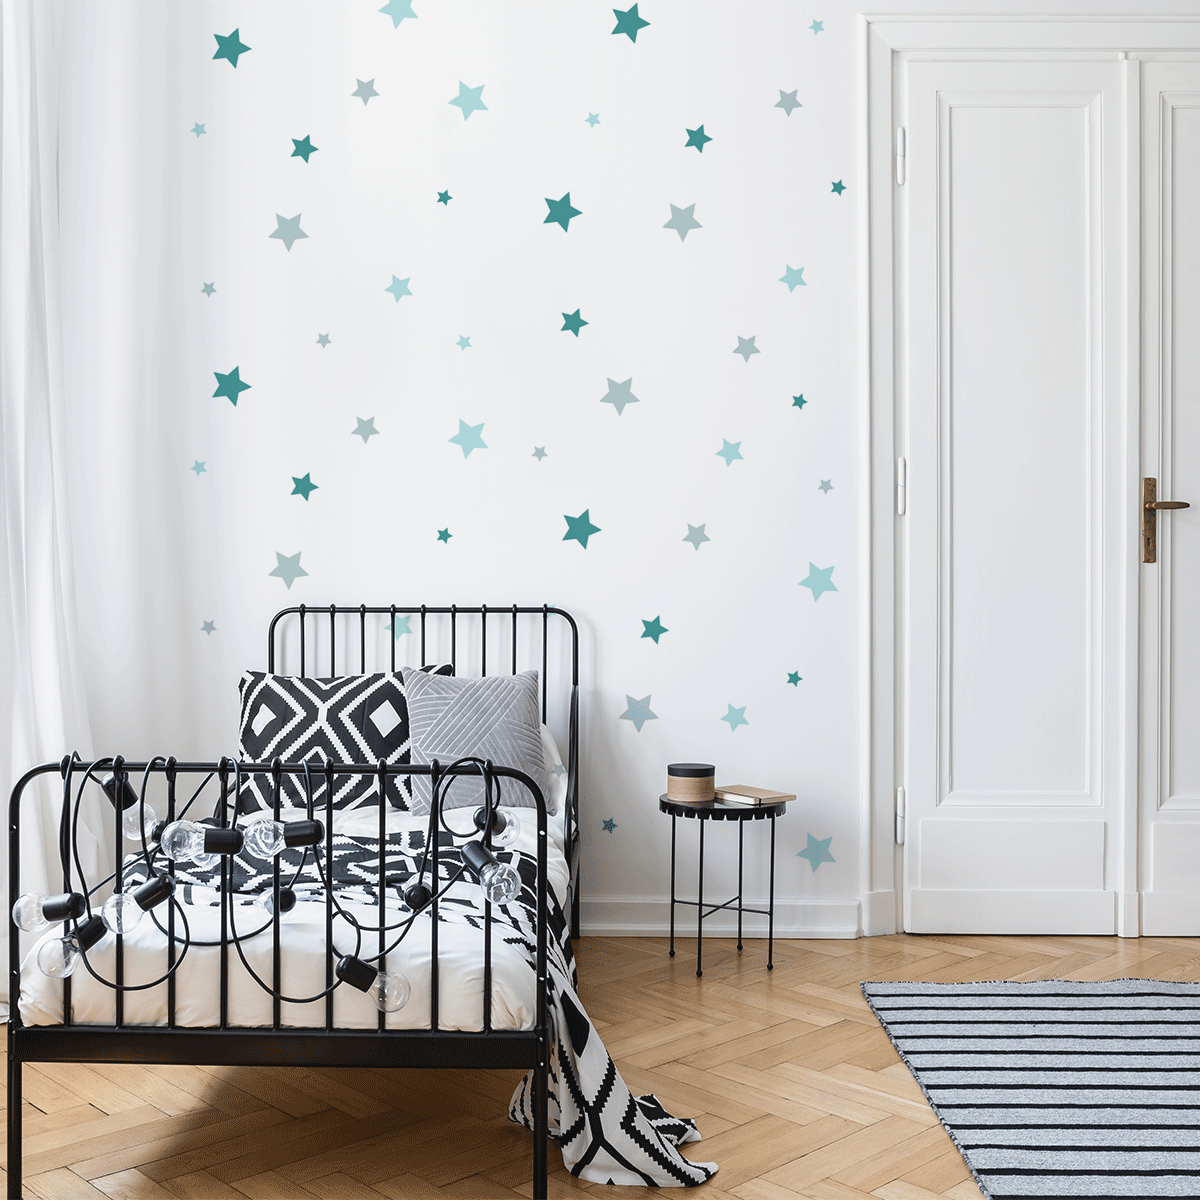 wall decal, blue and grey stars wall stickers, wall stickers with stars, wall decal with stars, wall sticker with stars, nursery pattern sticker, wall sticker, boys wall sticker, wall tattoo, nursery wall tattoo, kids bedroom wall tattoo, kids bedroom wall sticker, nursery wall sticker, kids bedroom ideas, nursery ideas, nursery decoration ideas, children room ideas